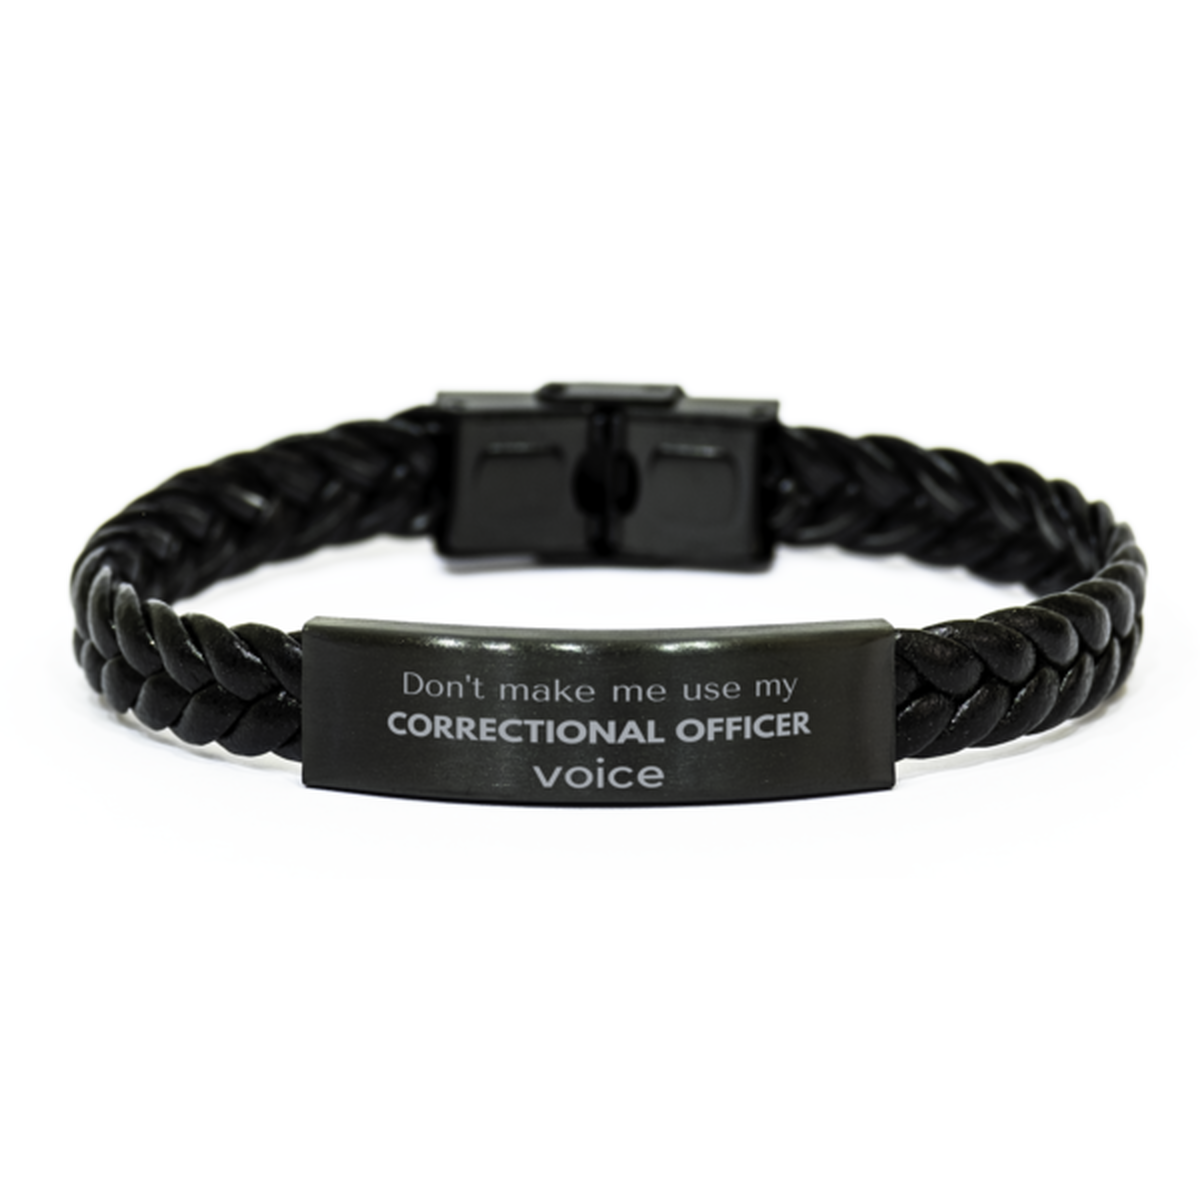 Don't make me use my Correctional Officer voice, Sarcasm Correctional Officer Gifts, Christmas Correctional Officer Braided Leather Bracelet Birthday Unique Gifts For Correctional Officer Coworkers, Men, Women, Colleague, Friends